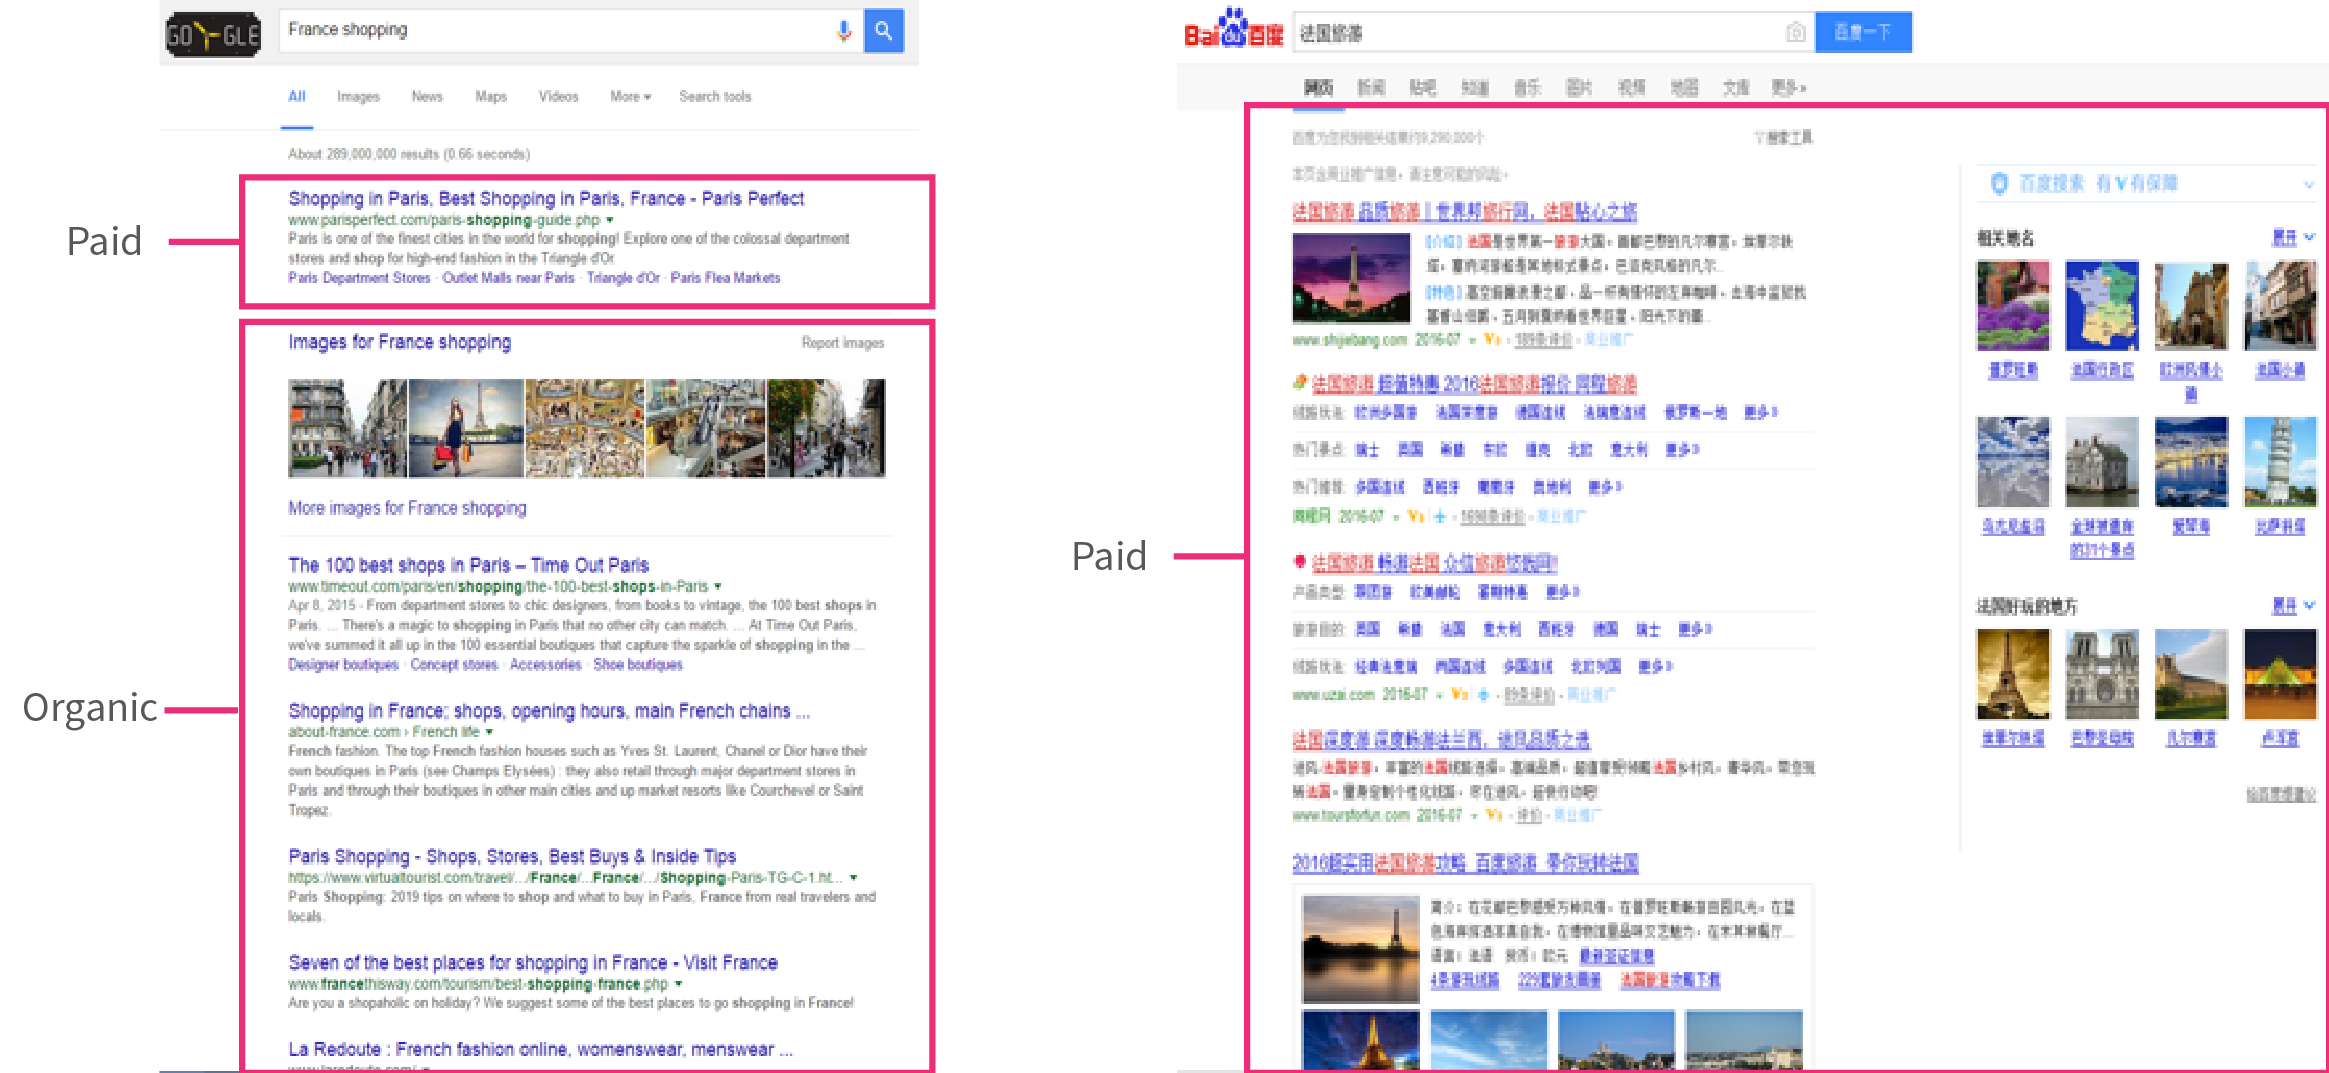 Examples of travel-related searches on Baidu compared to Google. Most Chinese travelers do extensive online research of the destinations (and the shopping options there) before heading on their trips.